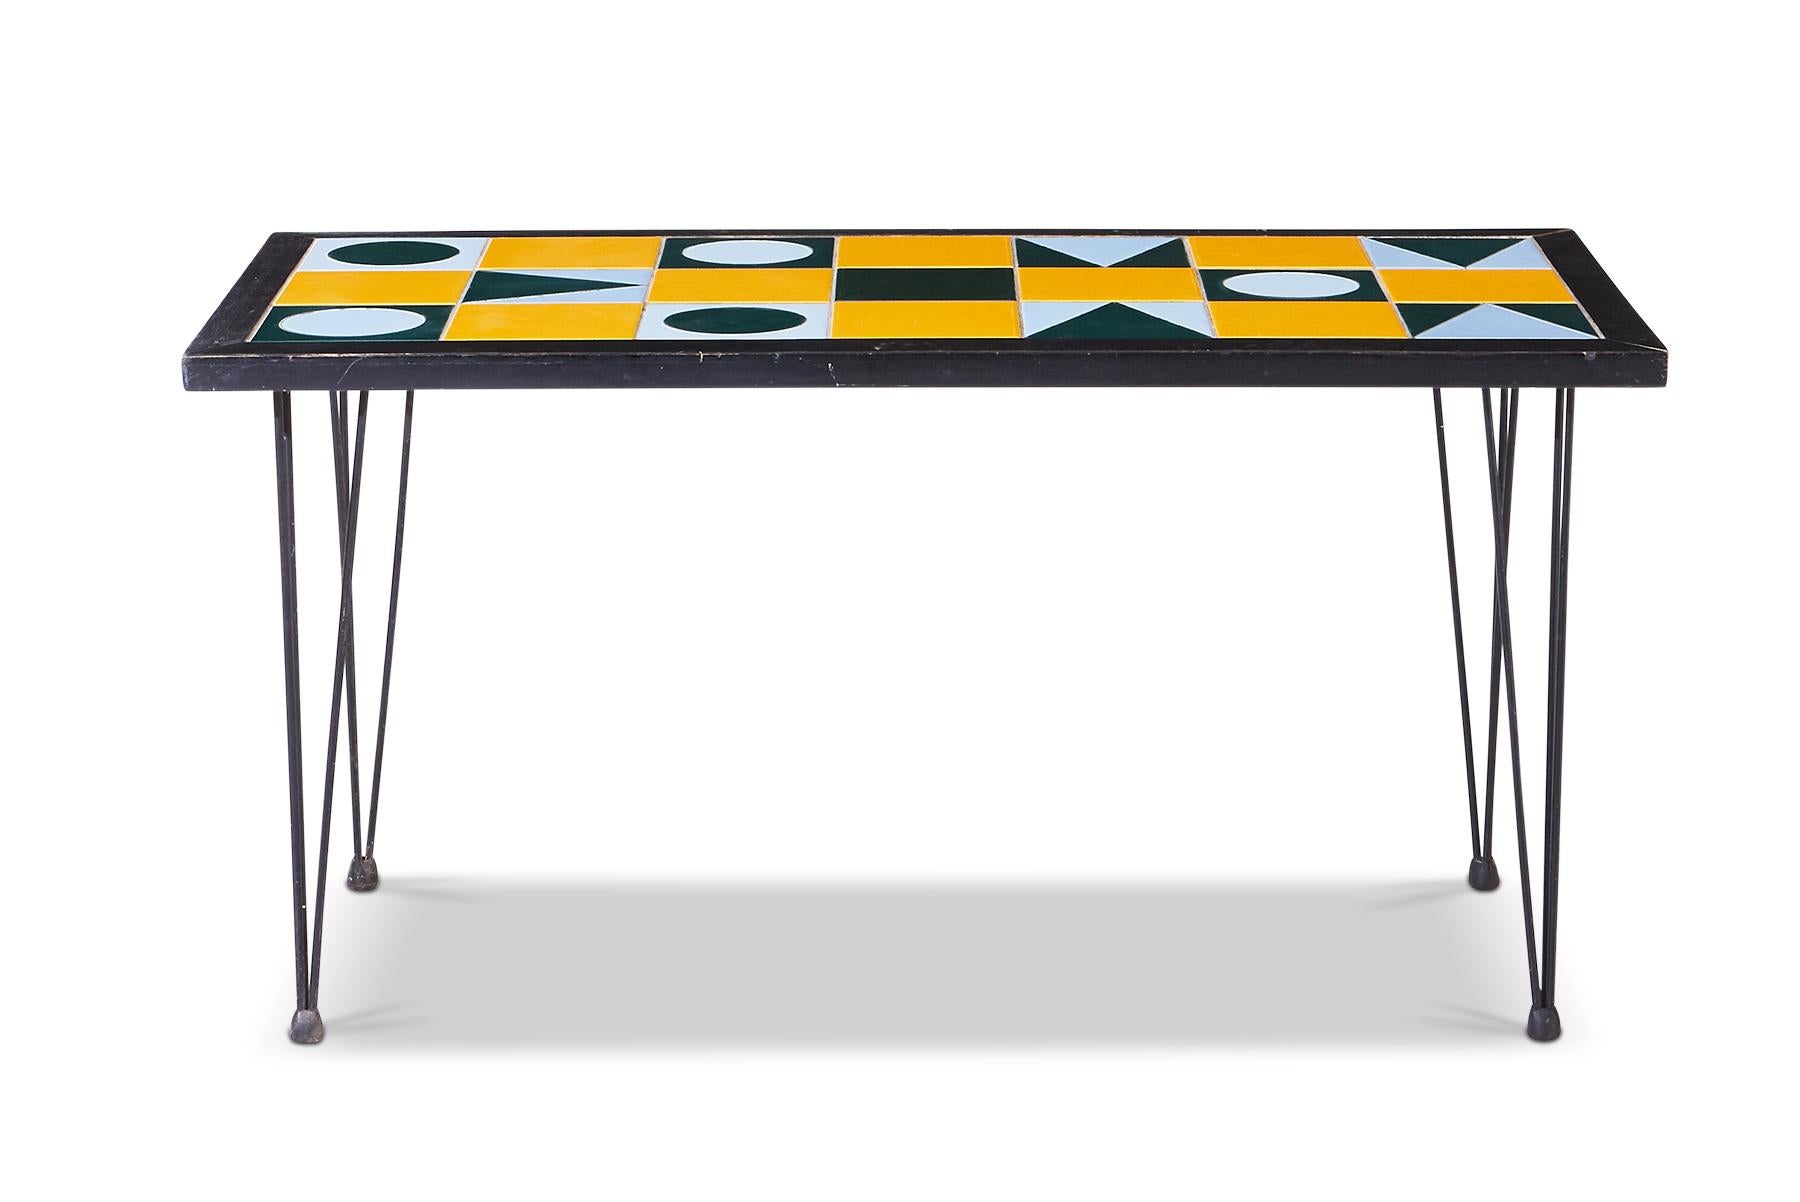 1960s Swedish Modern Geometric Tile Top Coffee Table In Good Condition For Sale In Berkeley, CA